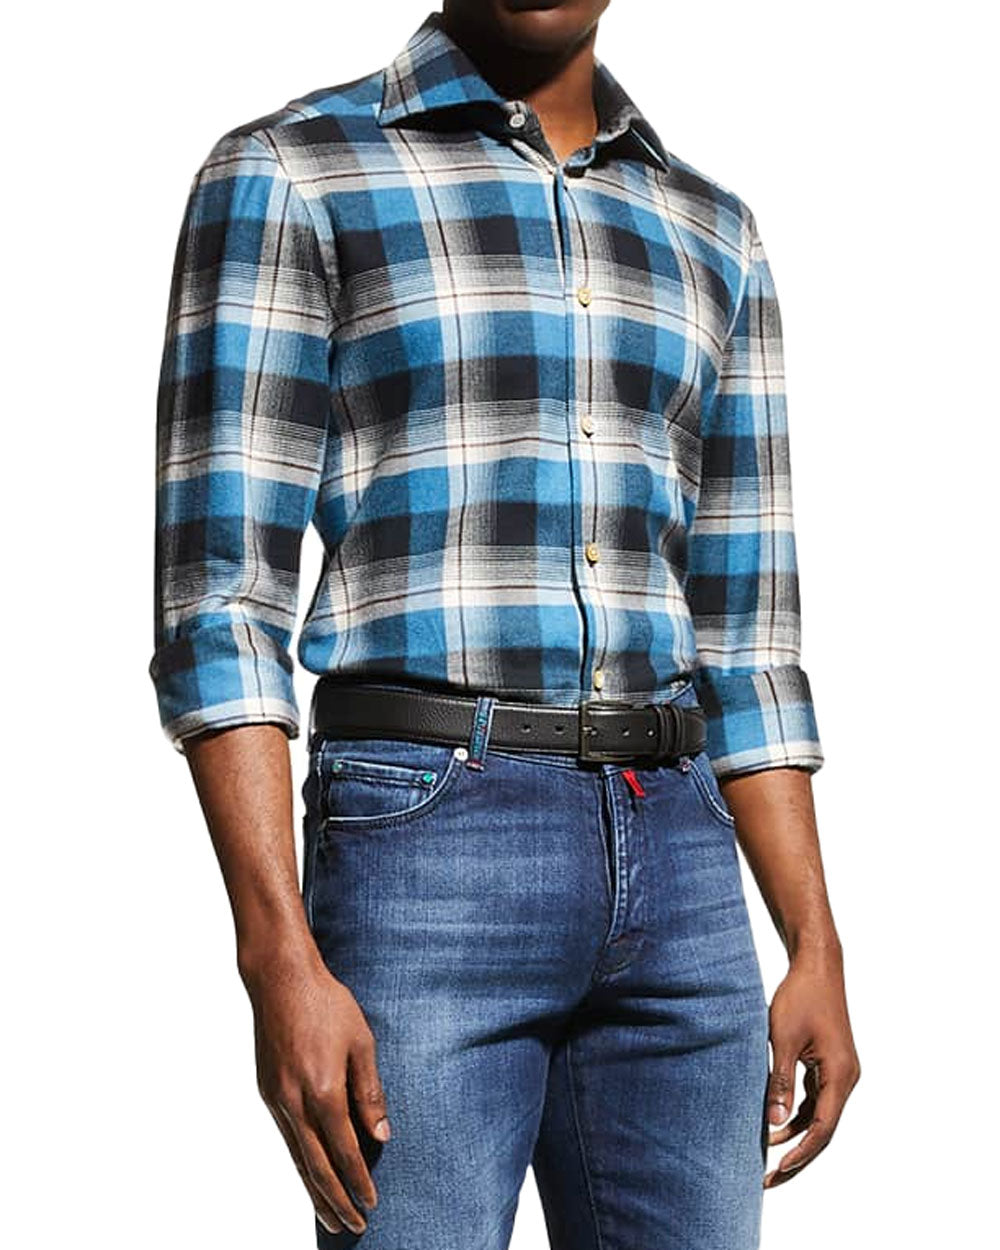 Plaid Sportshirt in Blue and Brown